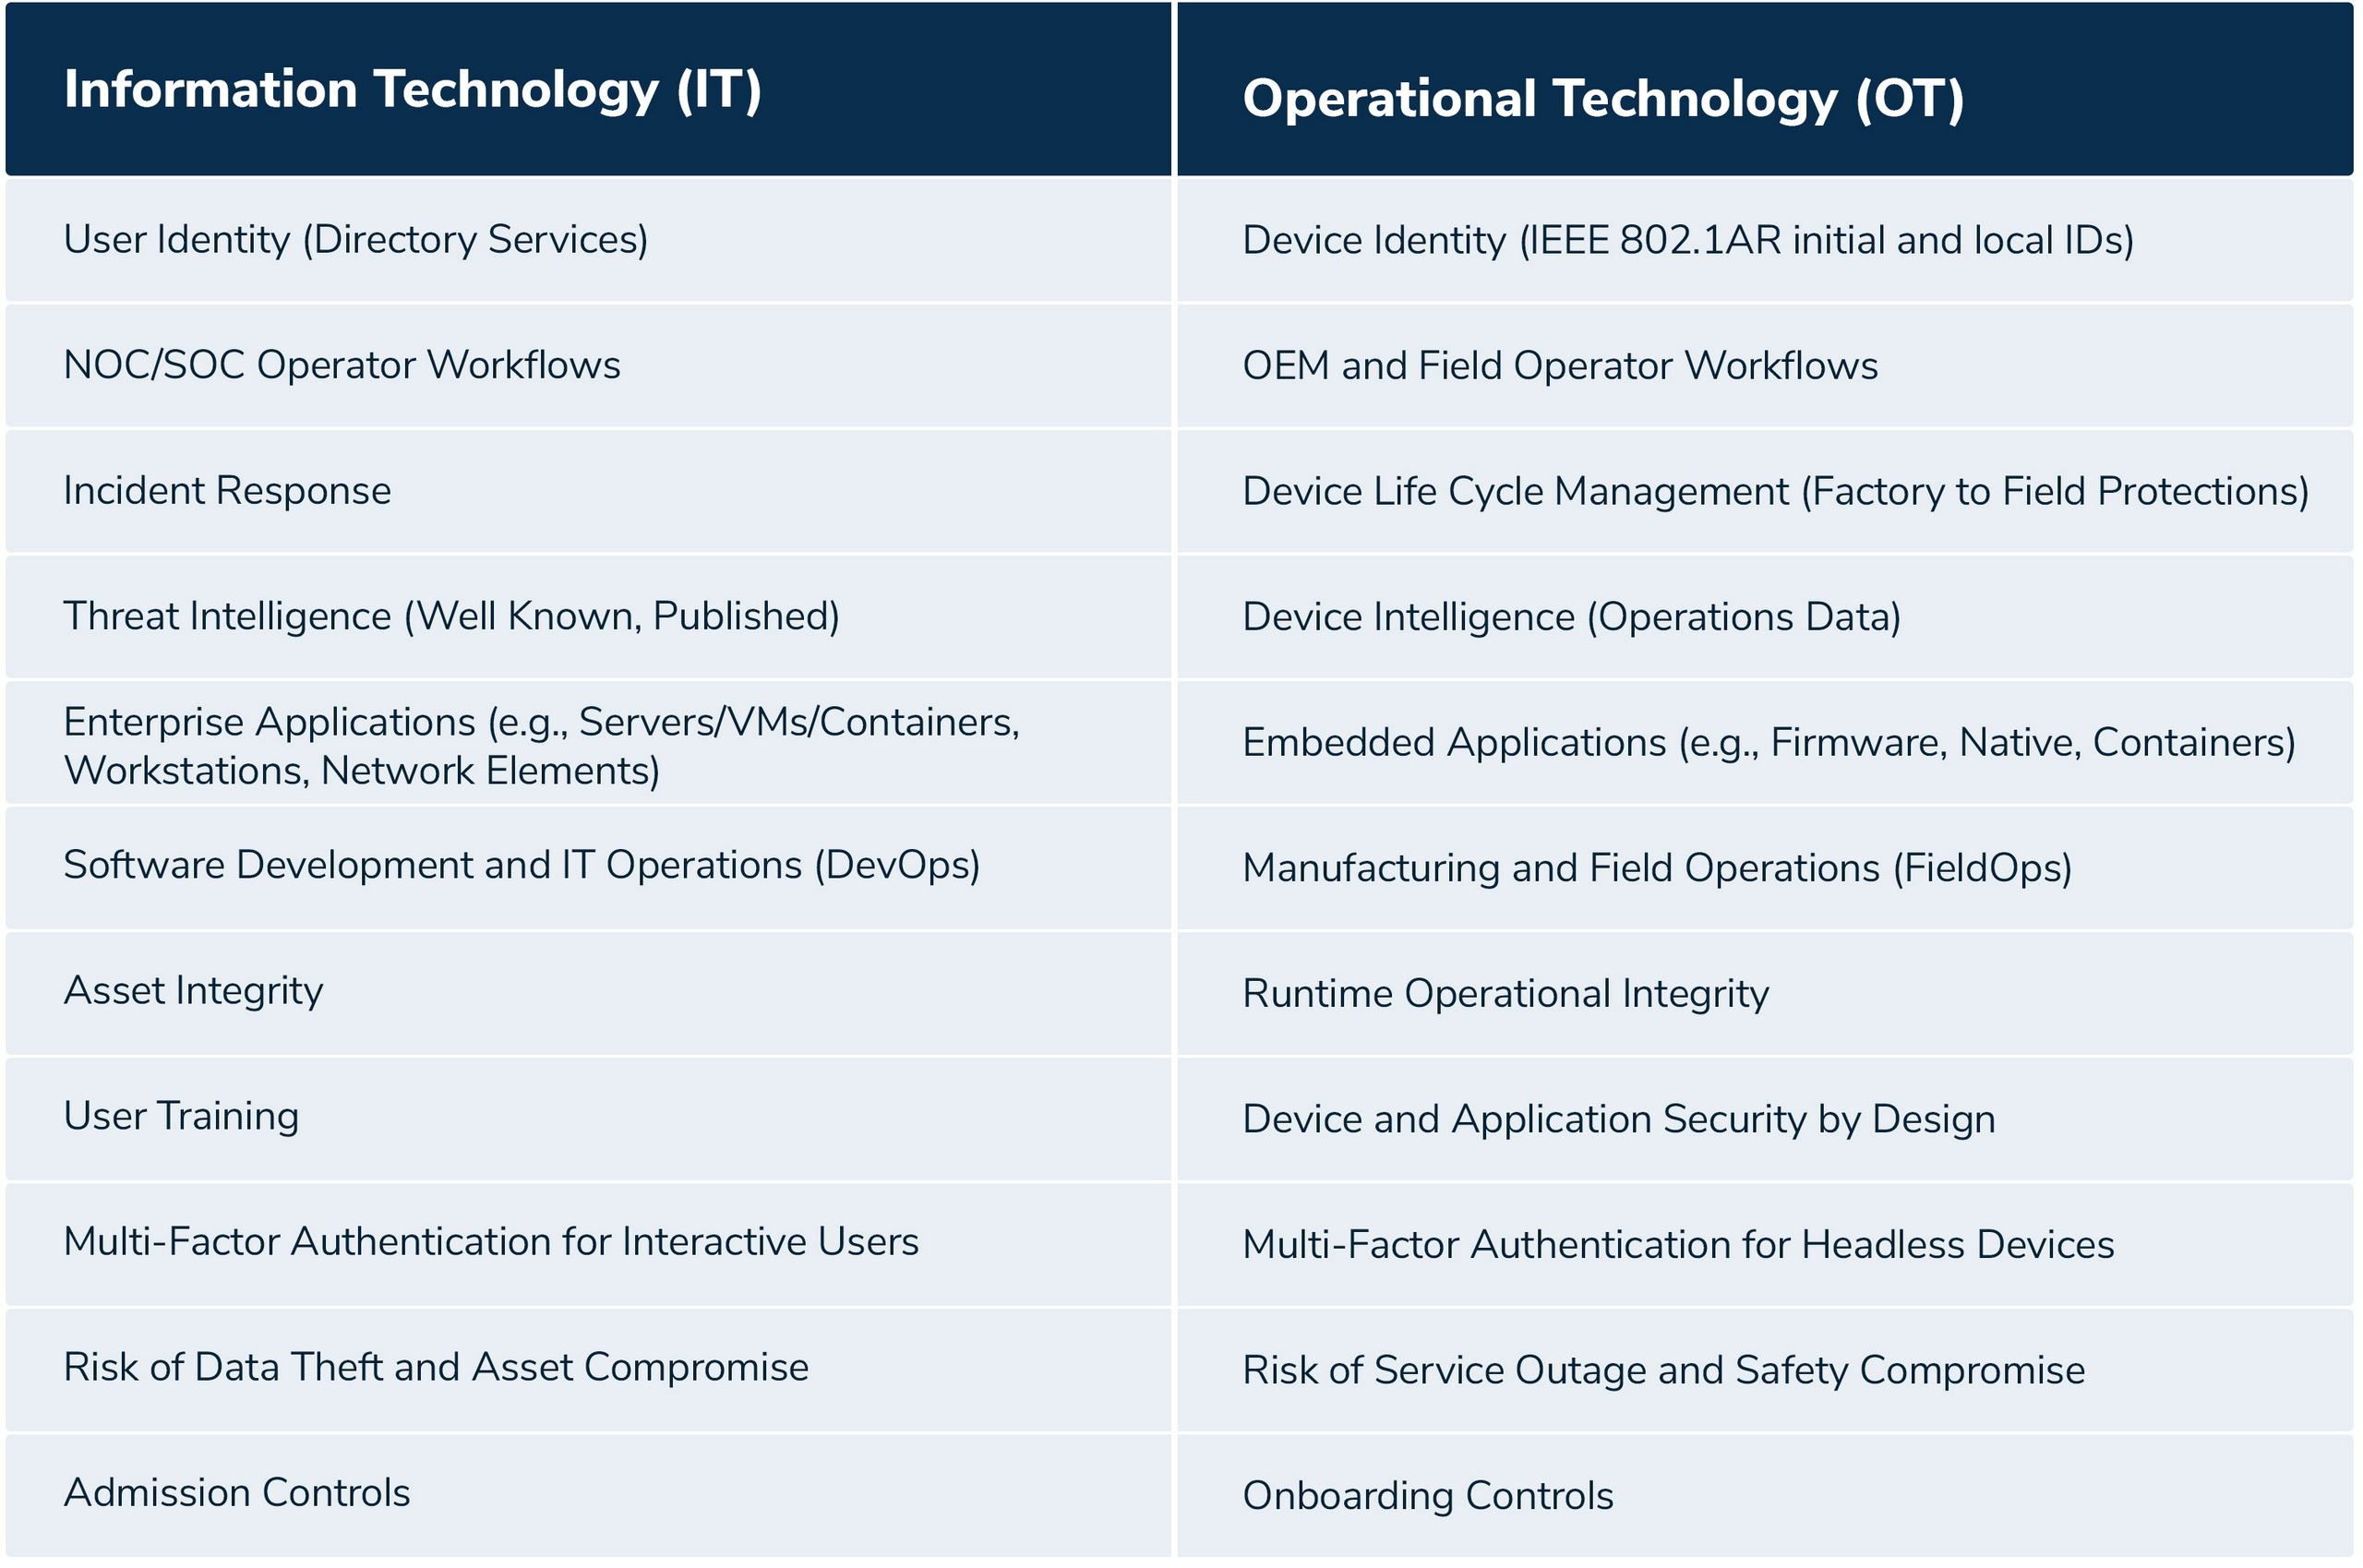 The risks in the operational technology (OT) ecosystem are different from threats in the information technology (IT) ecosystem because the means and methods employed are fundamentally different. Cyberattacks aimed at OT weaponize cryptography, exploit gaps in supply chain provenance, absence of identification and authentication, and insecure communications.